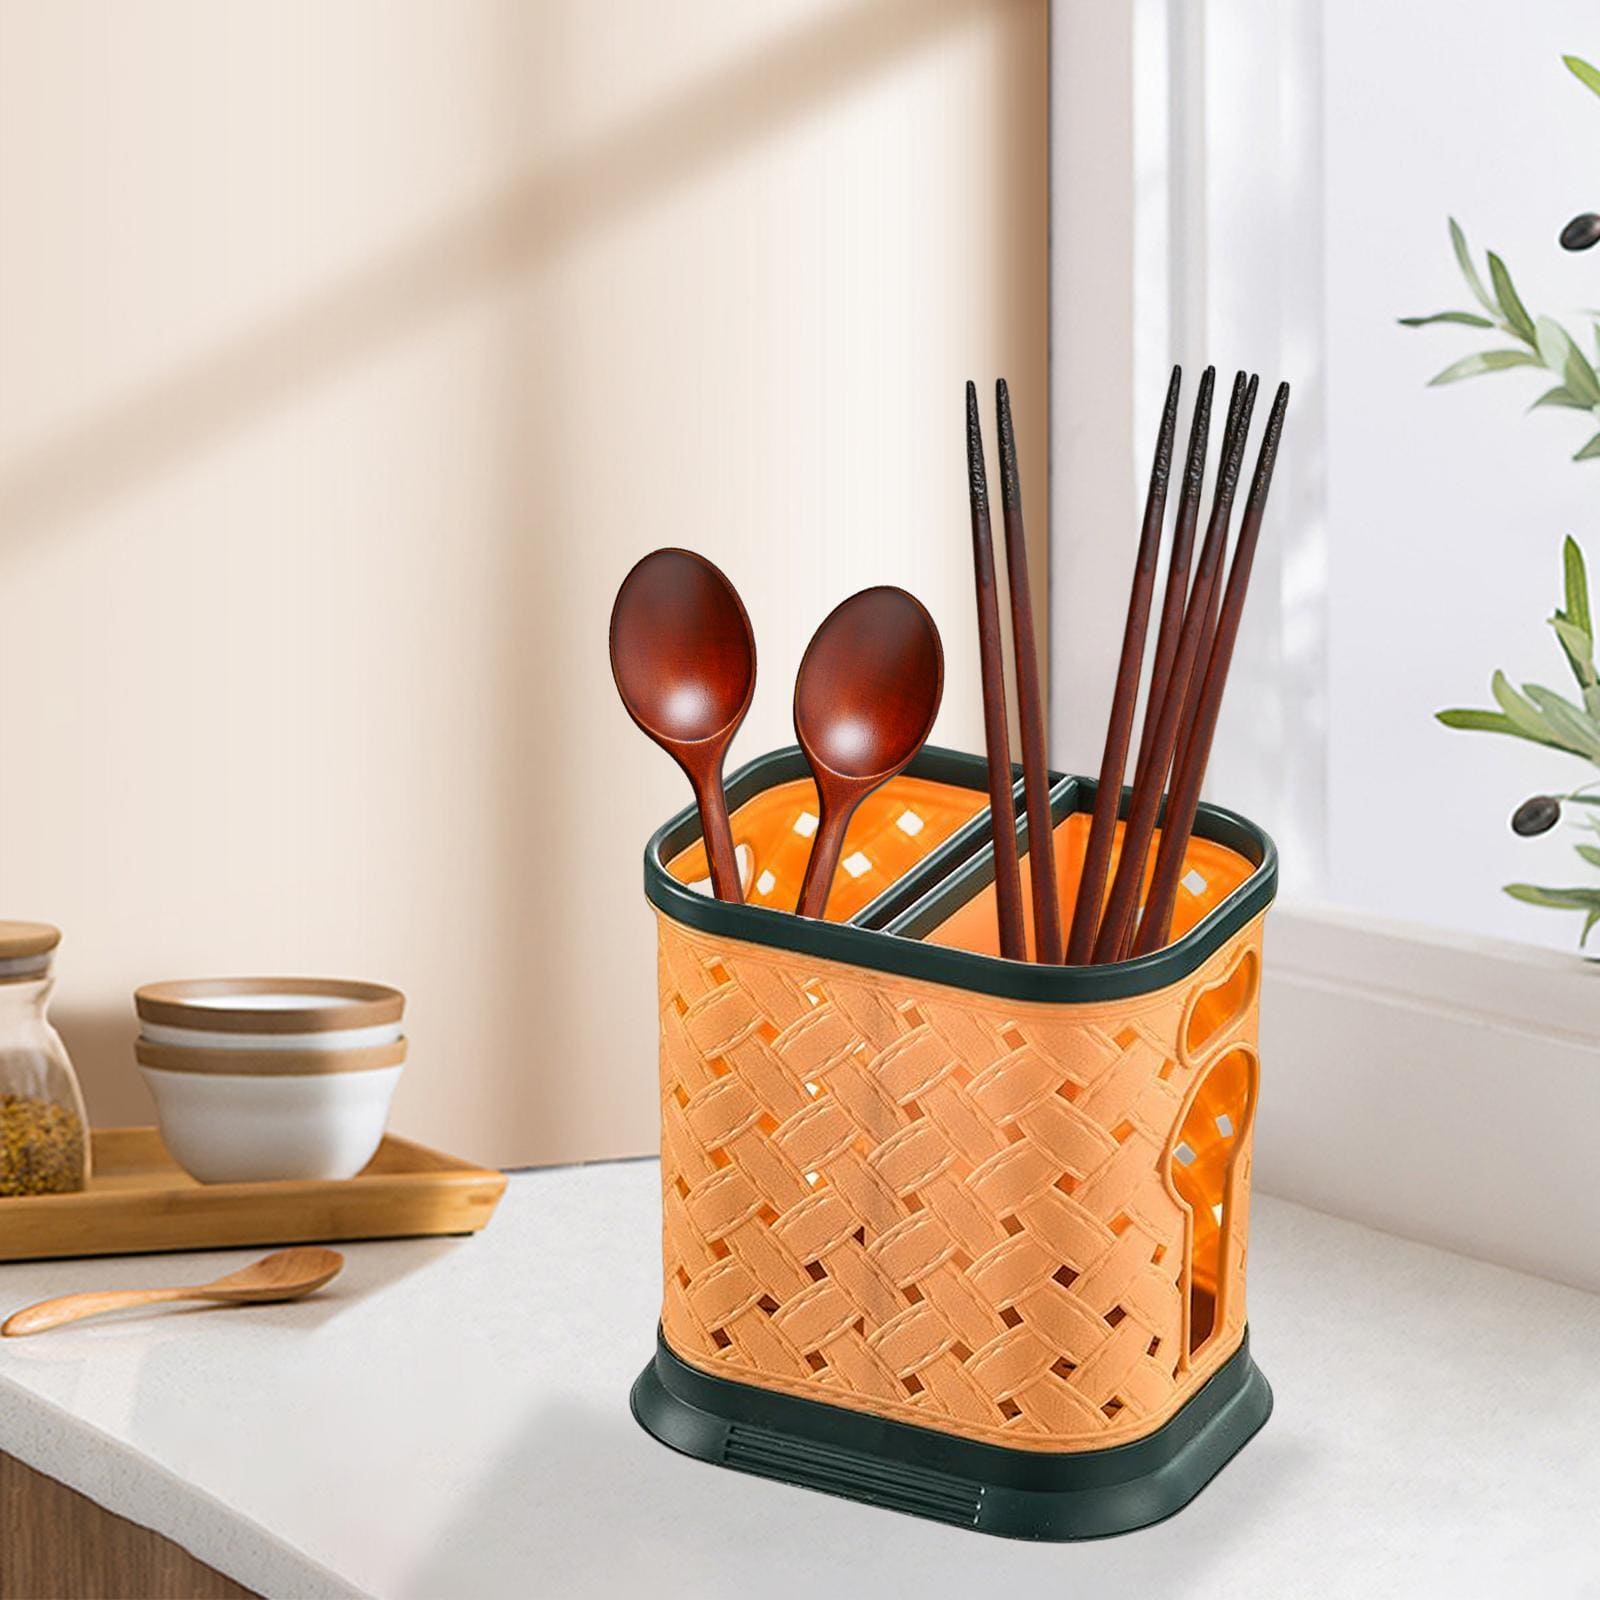 Criss Cross Cutlery Holder, Plastic Chopsticks Cage, Hollow Drain Tableware Rack, Knife Stand Spoon Fork Storage Shelf Container, Kitchen Cutlery Drying Rack Basket, Cooking Utensil Holder, Utensil Caddy Compartment